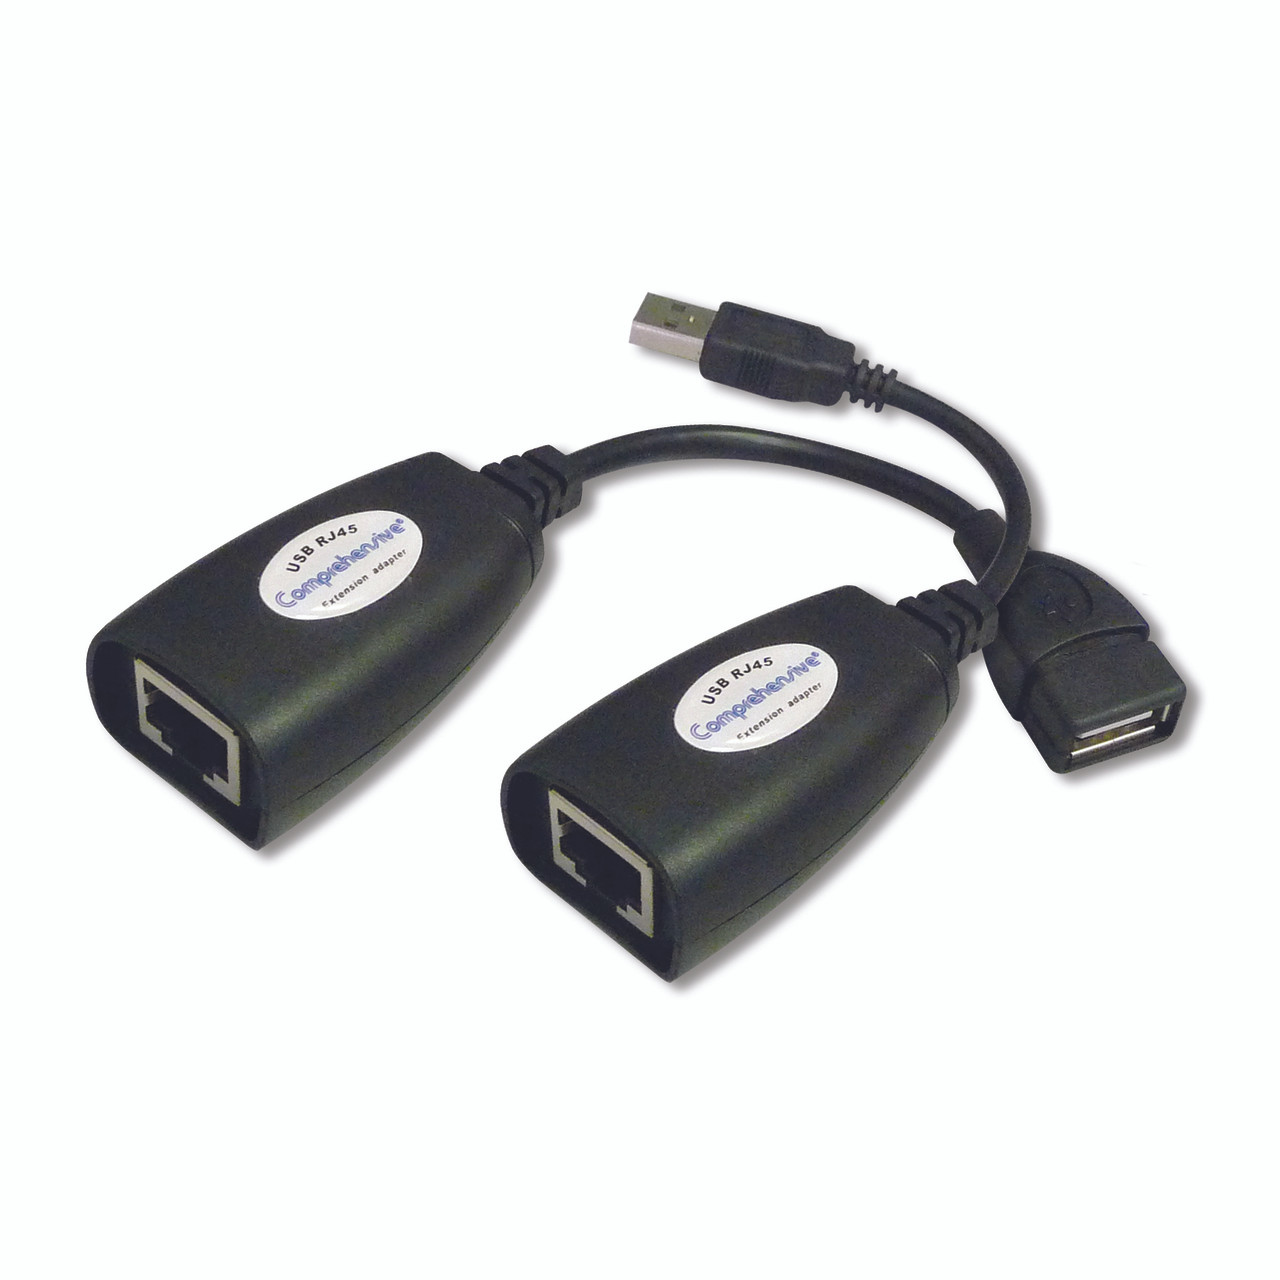 USB Extension Over Ethernet RJ45 Cat5e Cat6 Network Cable LAN Adapter HUB 